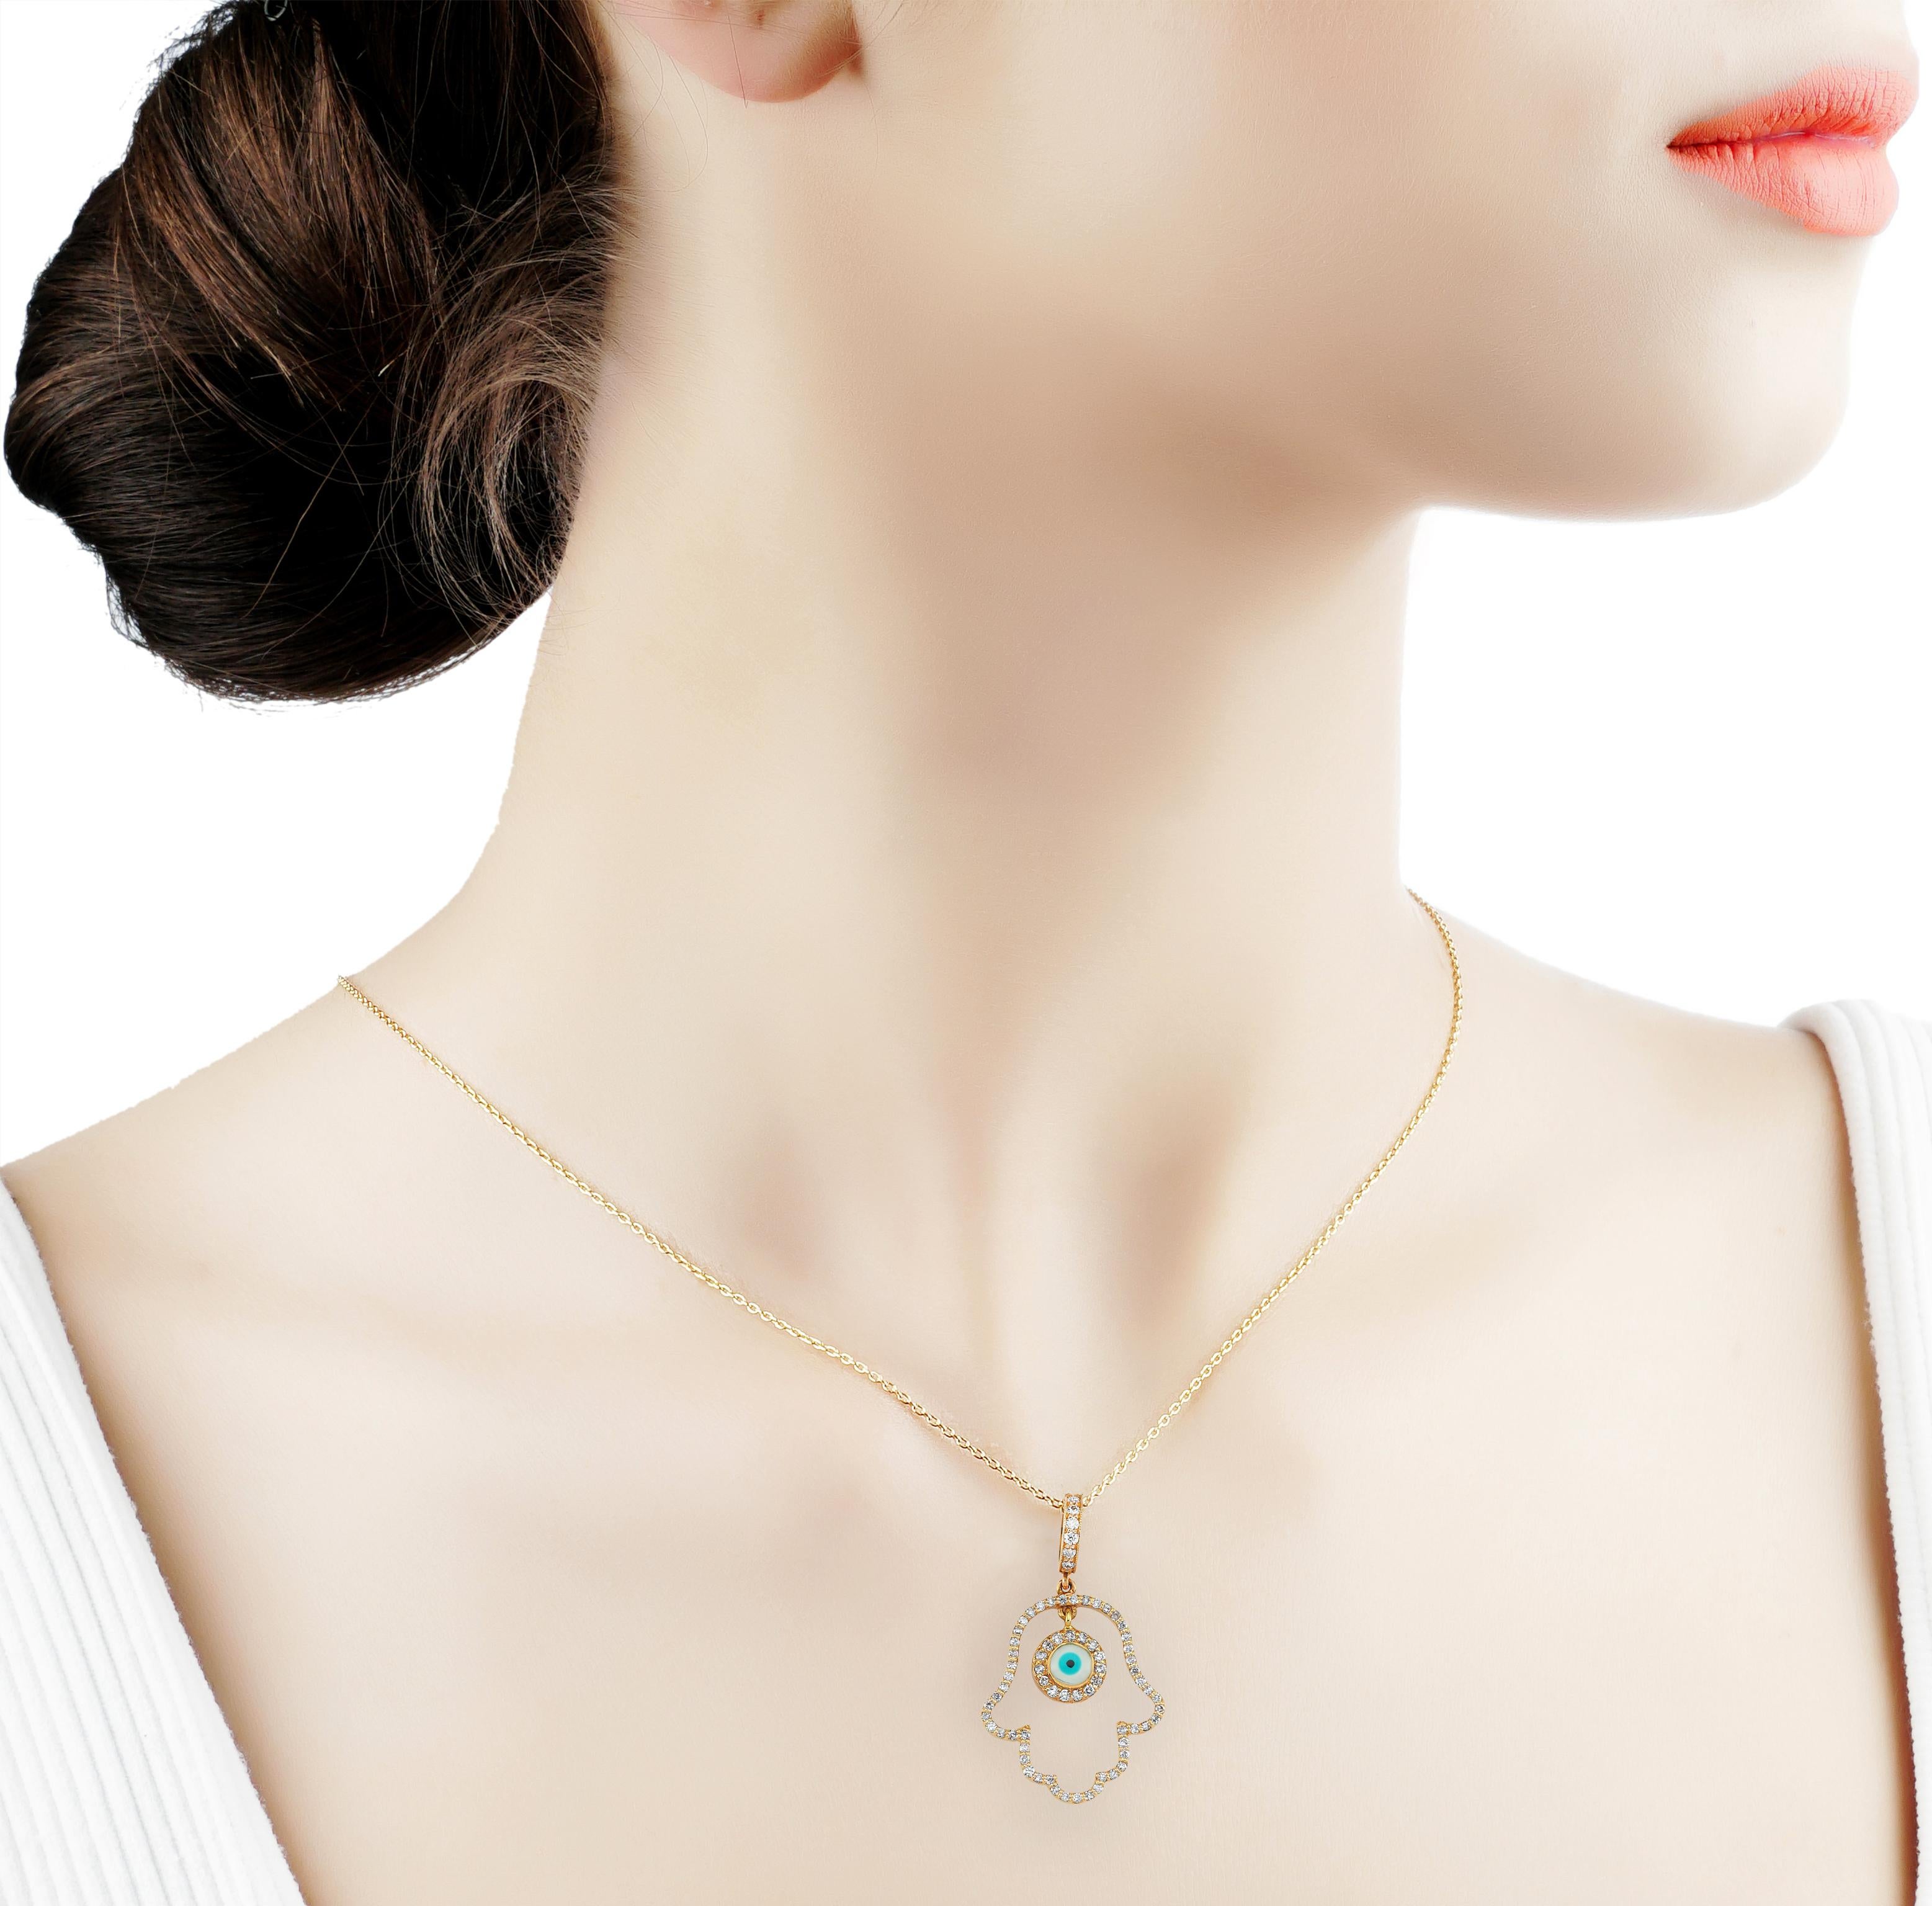 Hamsa Hand & Evil Eye Pendant Necklaces by Nazarlique

Our Necklaces Will Take Your Breath Away. Each Evil Eye Model Will Add An Elegant Touch To Your Look and Protection, Making Unforgettable Statements Everywhere You Go.

When a person wears or